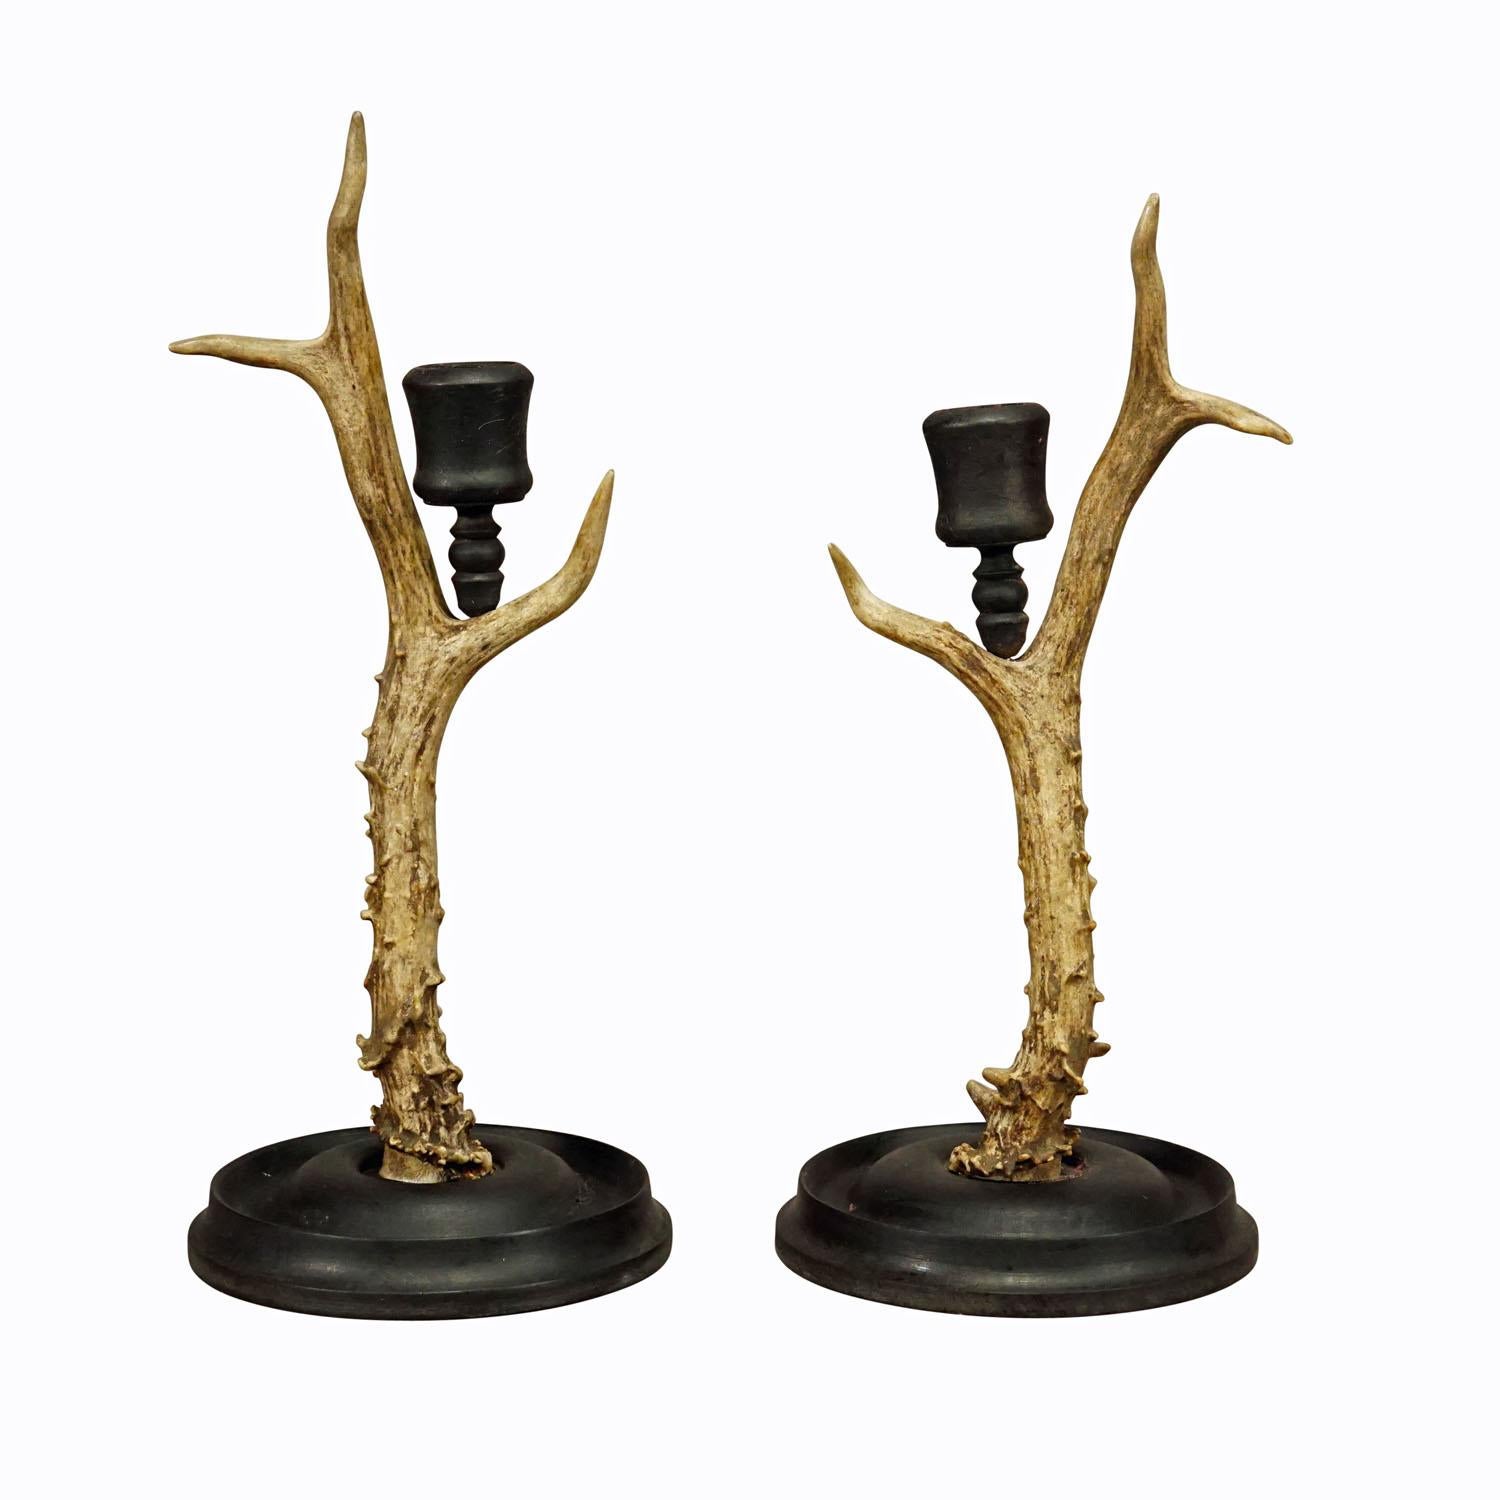 A Pair Vintage Black Forest Candle Holders with Wooden Base and Spout, Germany ca. 1930s

The pair of Black Forest candle holders consists of a wooden turned base and spouts. Each made with an original deer horn. Manufactured in South Germany mid